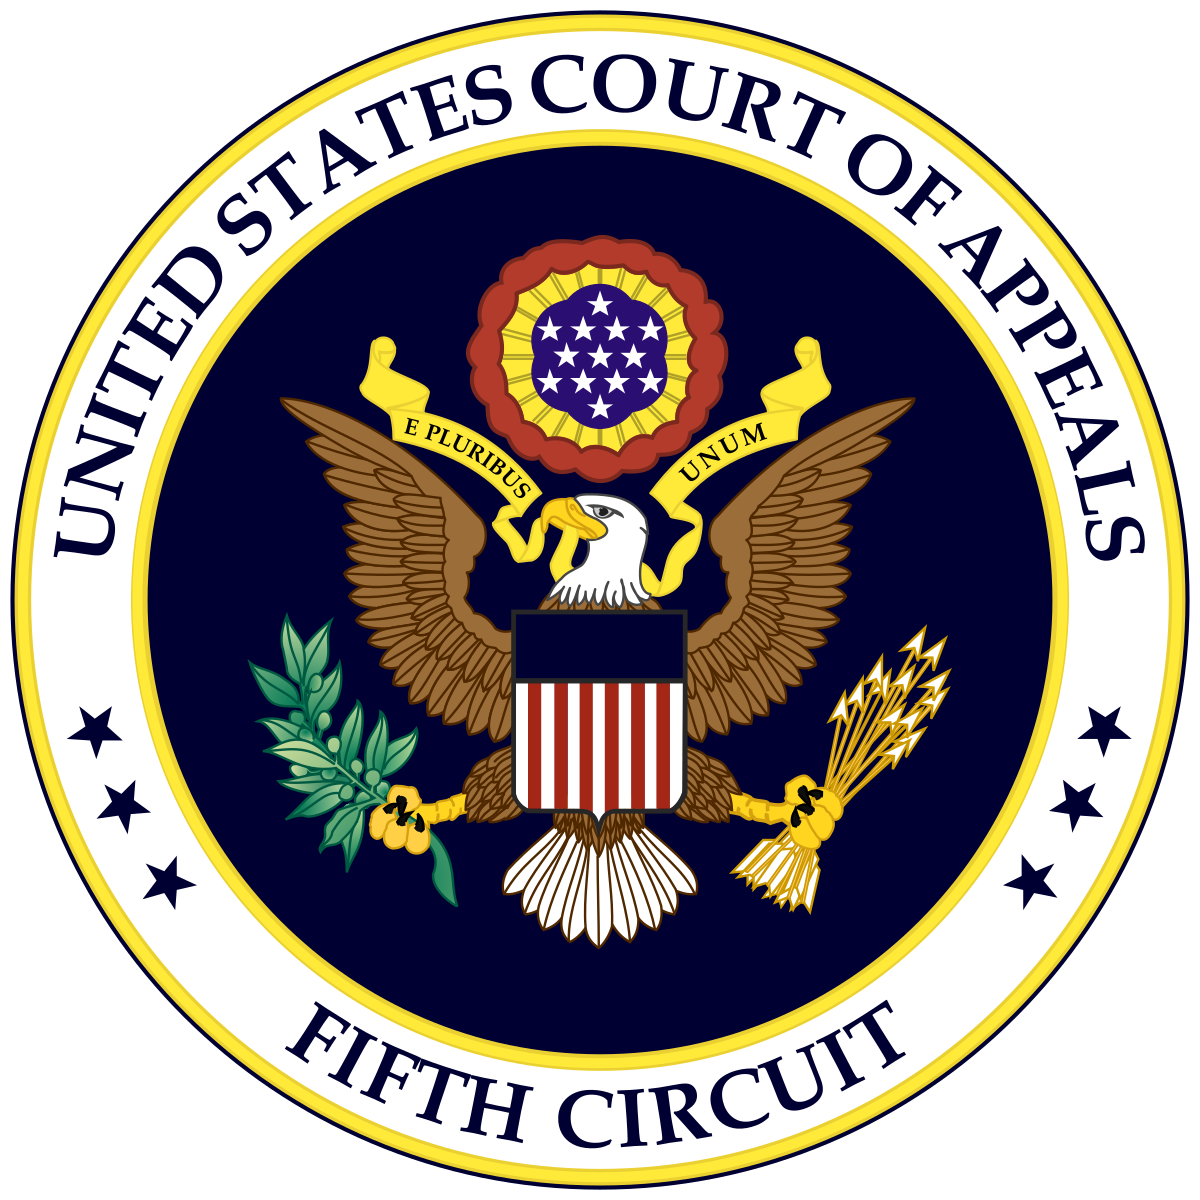 Landmark Children’s Rights Case Now Before the Fifth Circuit